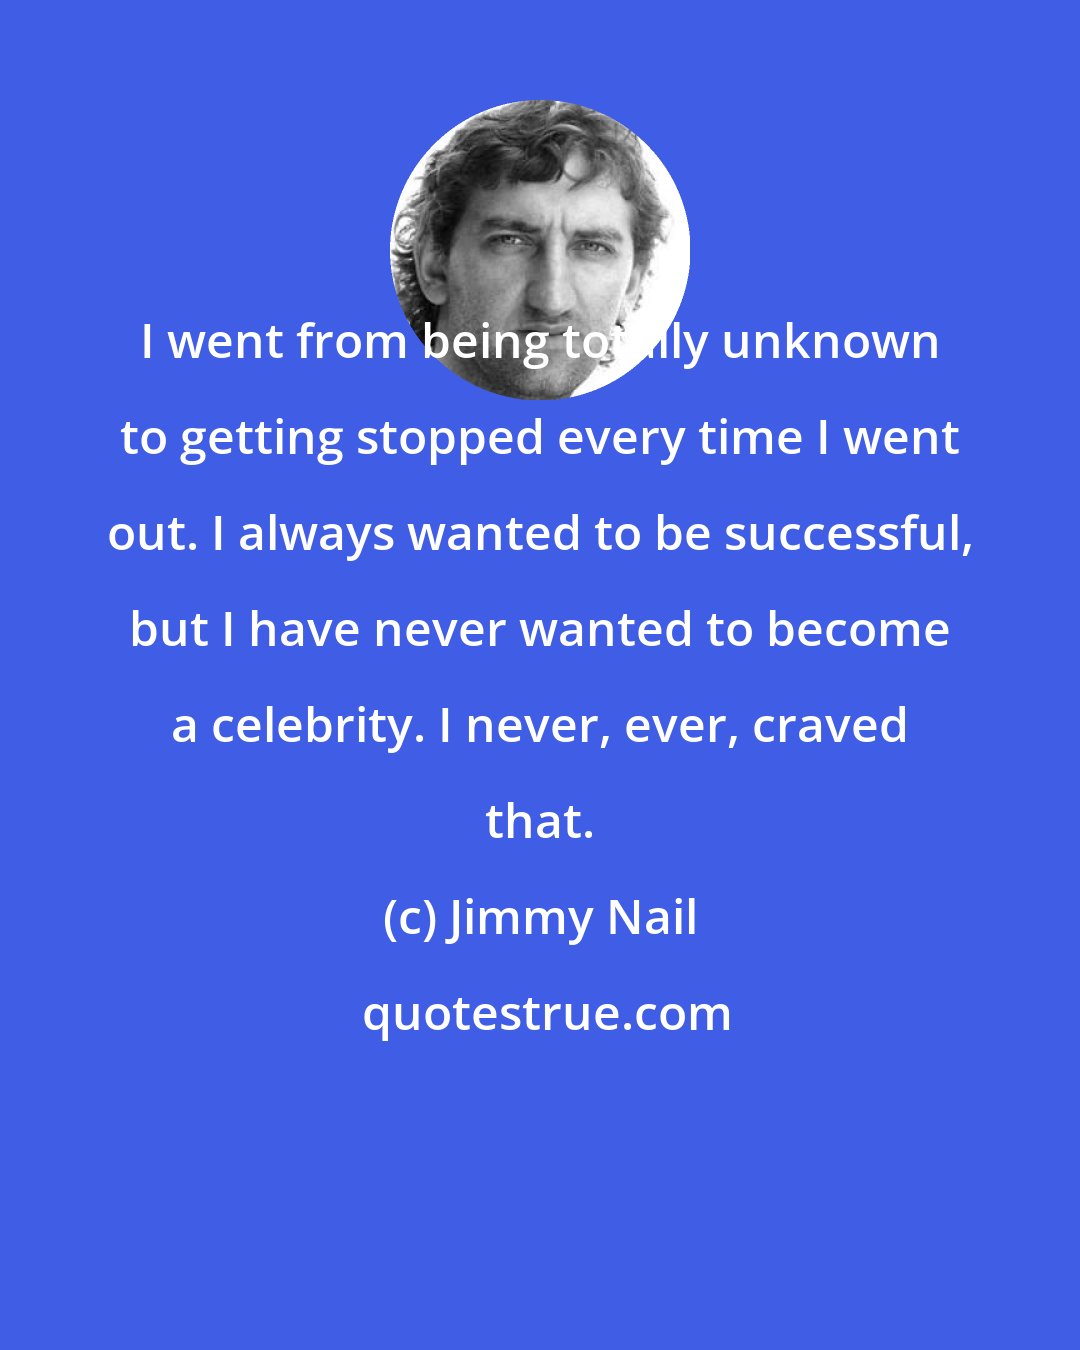 Jimmy Nail: I went from being totally unknown to getting stopped every time I went out. I always wanted to be successful, but I have never wanted to become a celebrity. I never, ever, craved that.